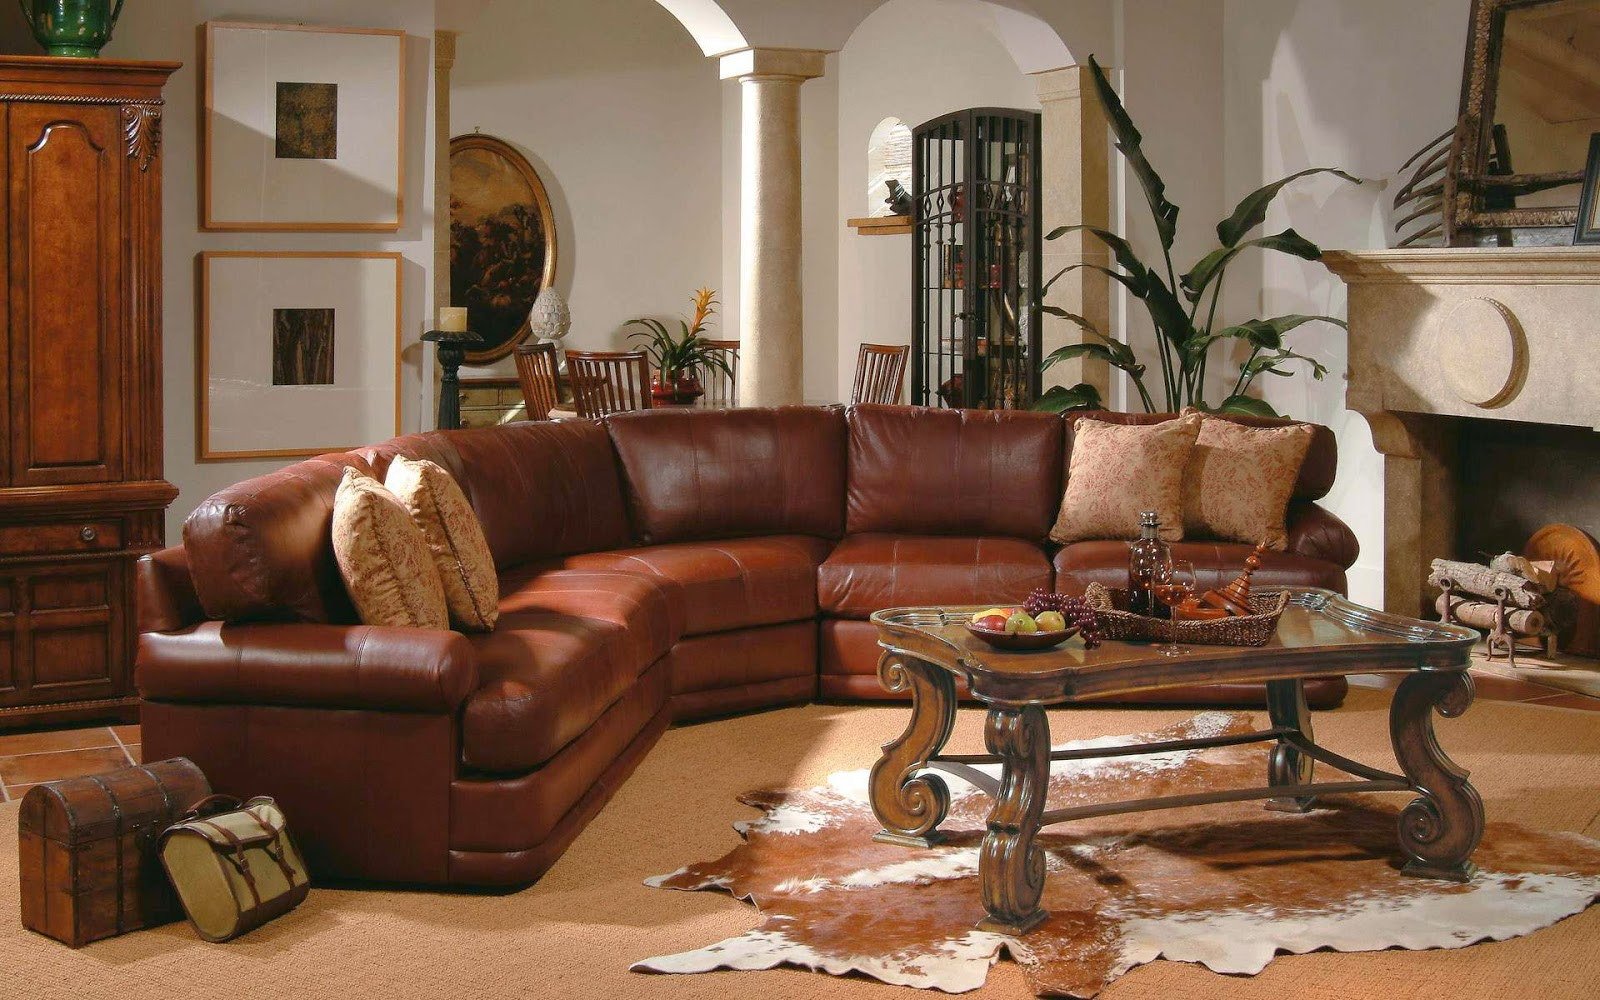 Brown Furniture Living Room Ideas
 6 Living Room Decor Ideas With Sectional